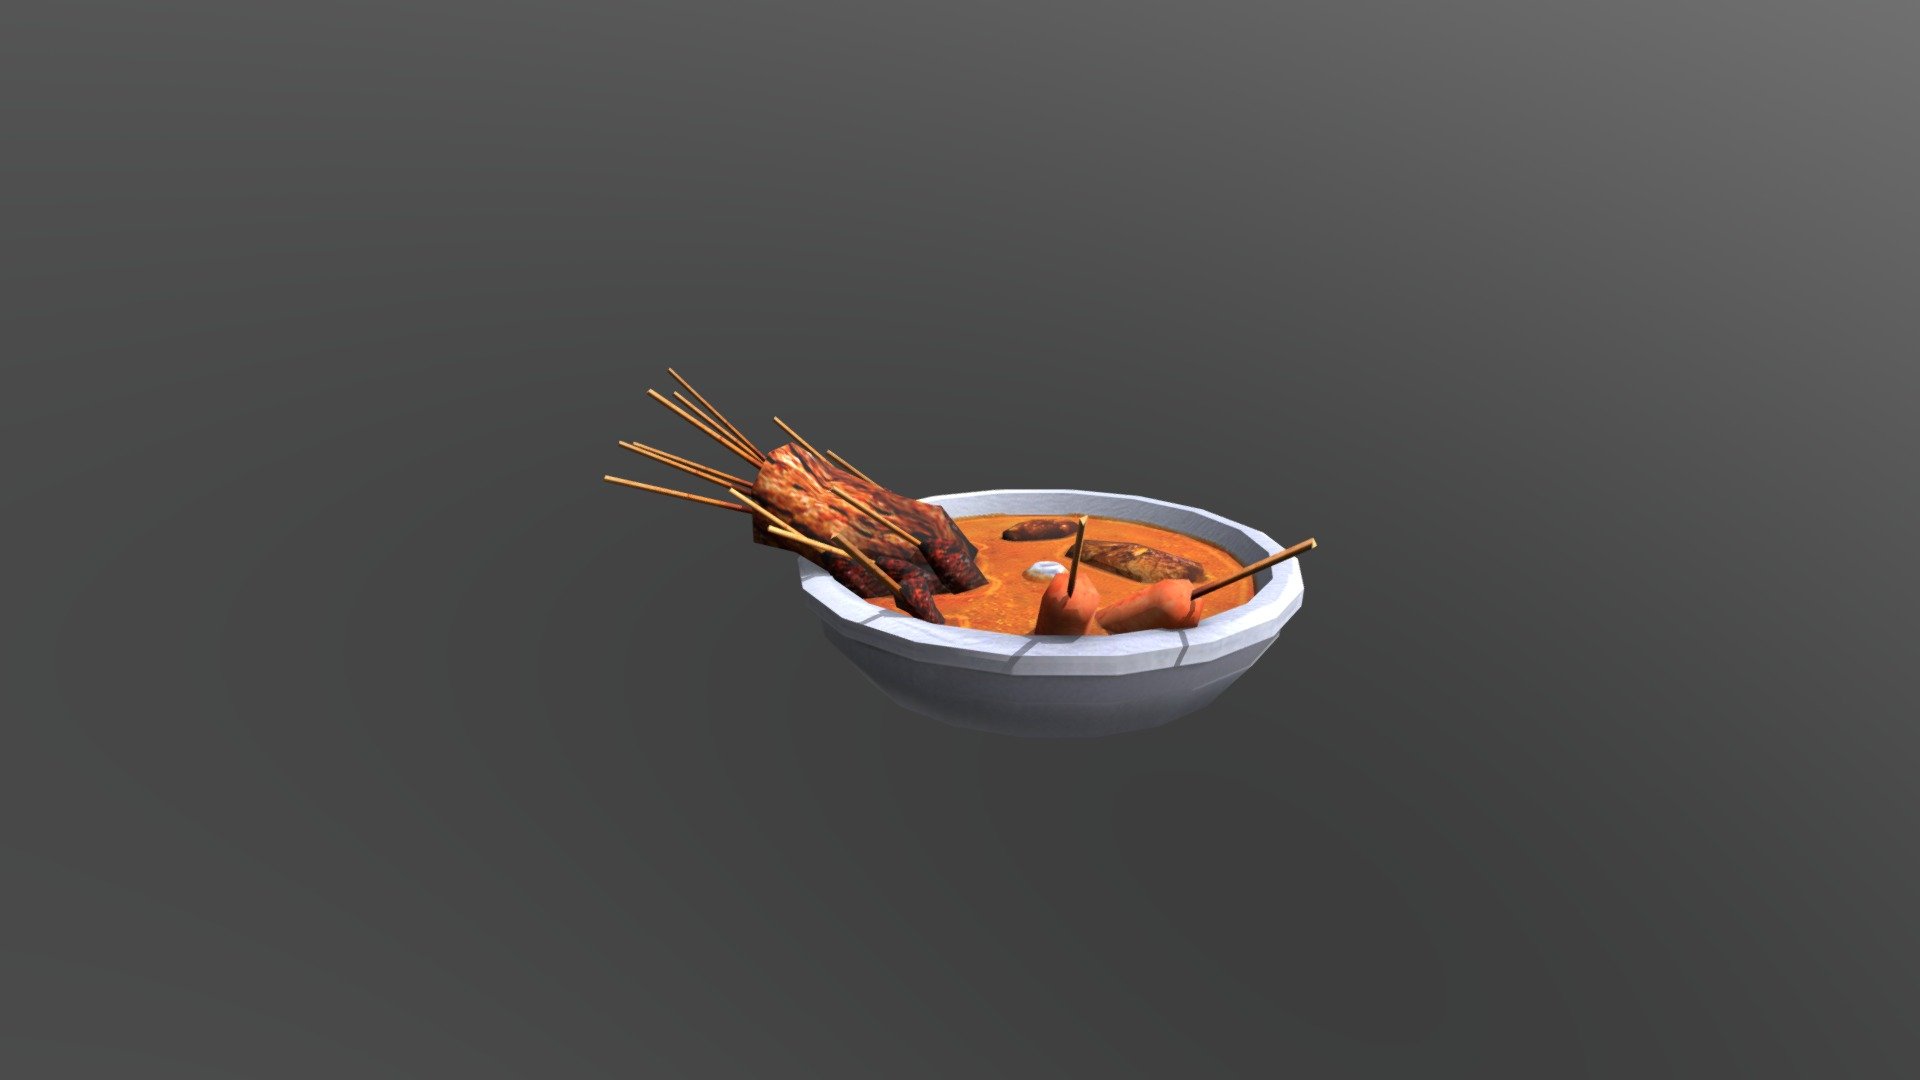 Foodbowl found frequently on the streetfood scene in Bangkok,Thailand

Made for my cityscene - Low Poly Foodbowl with meatskewers - Download Free 3D model by NicoFoets 3d model